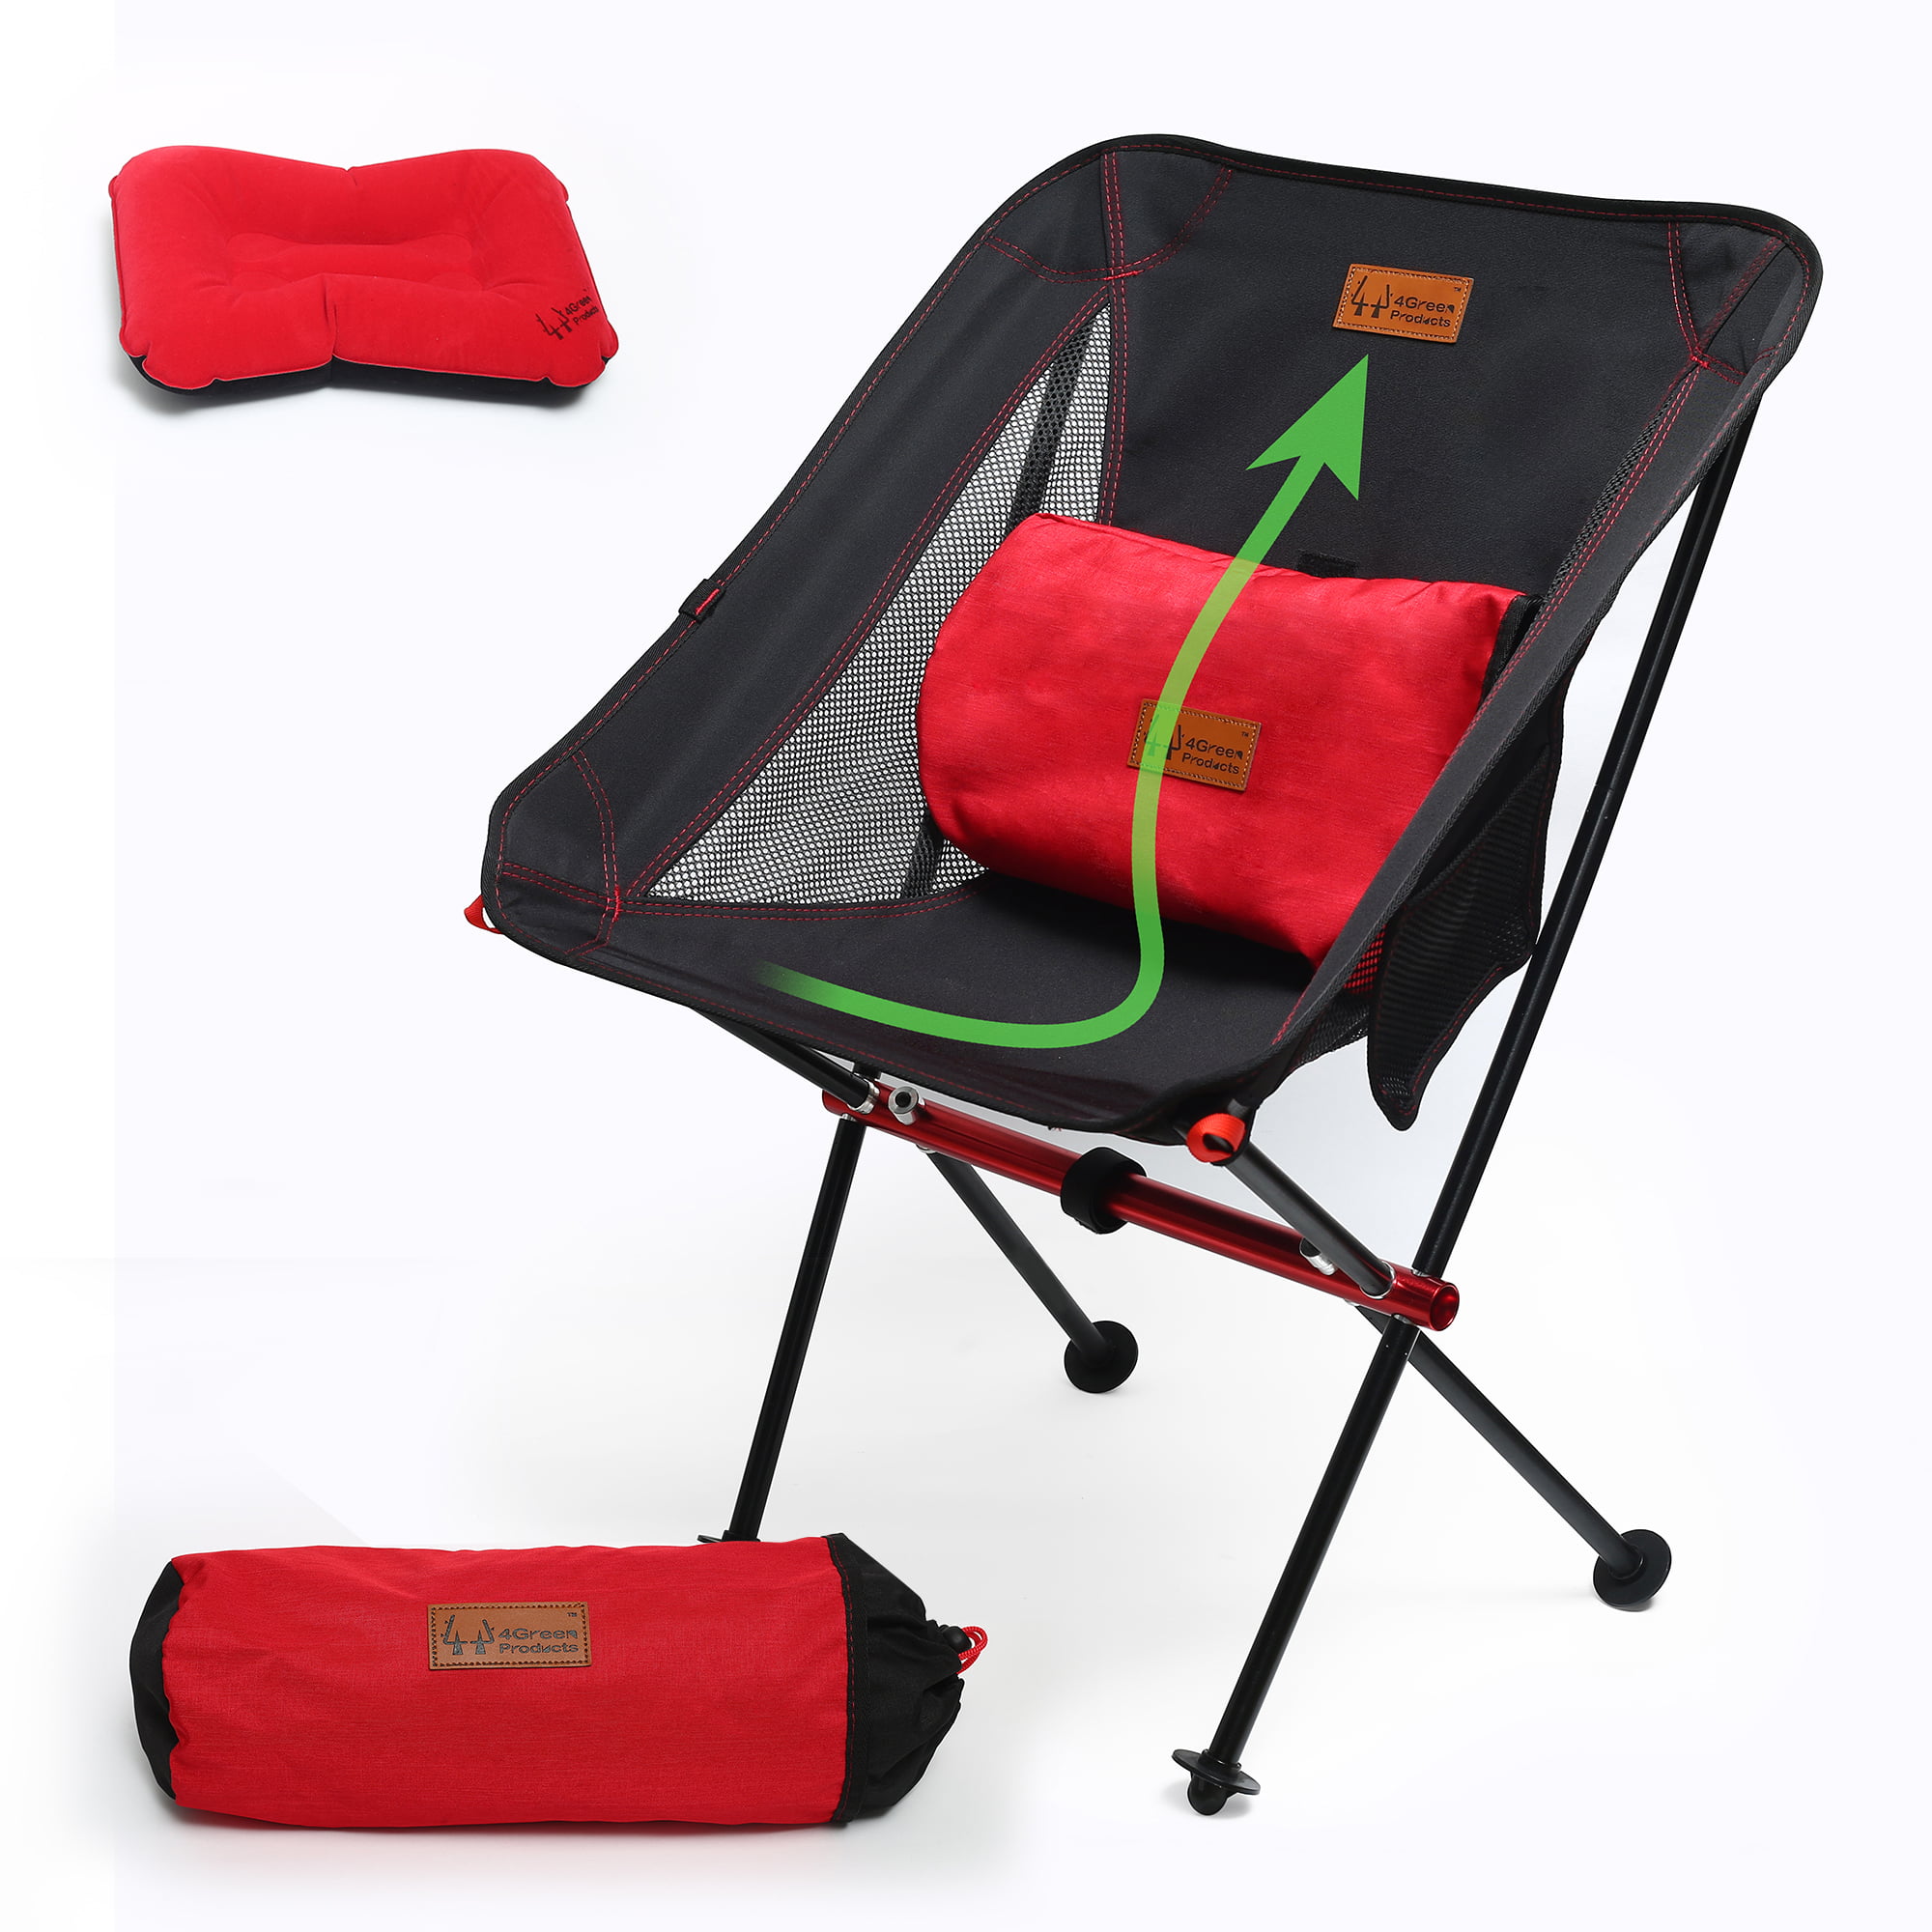 Black HOME HUT® FOLDING CAMPING CHAIR HIKING GARDEN INDOOR OUTDOOR FISHING SEAT GARDEN FESTIVAL Home and Garden Products Ltd